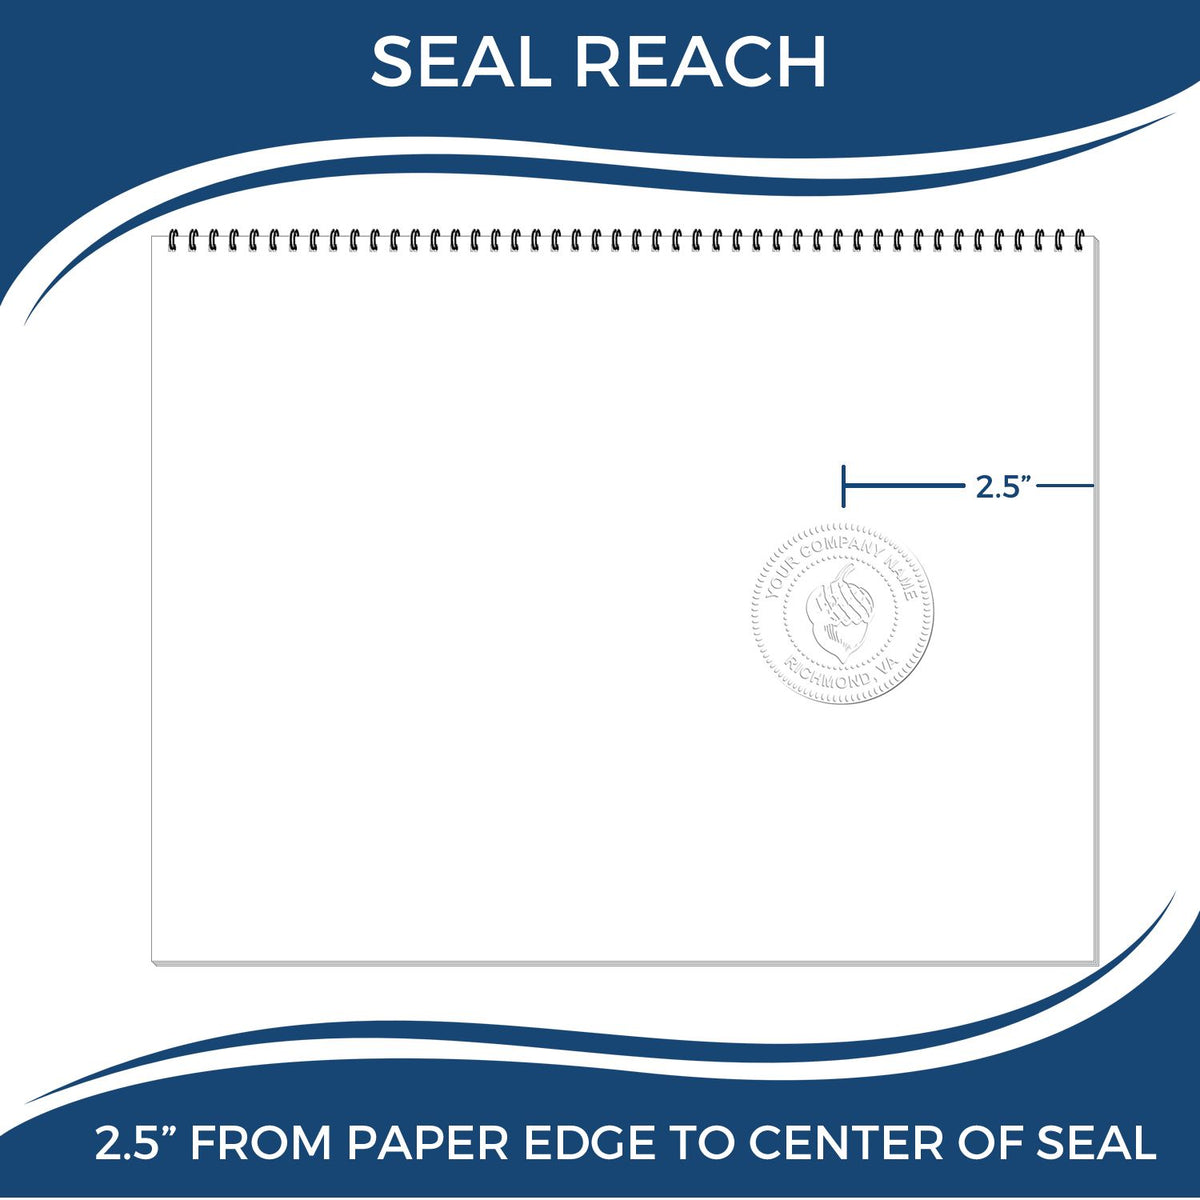 An infographic showing the seal reach which is represented by a ruler and a miniature seal image of the Long Reach Mississippi Geology Seal